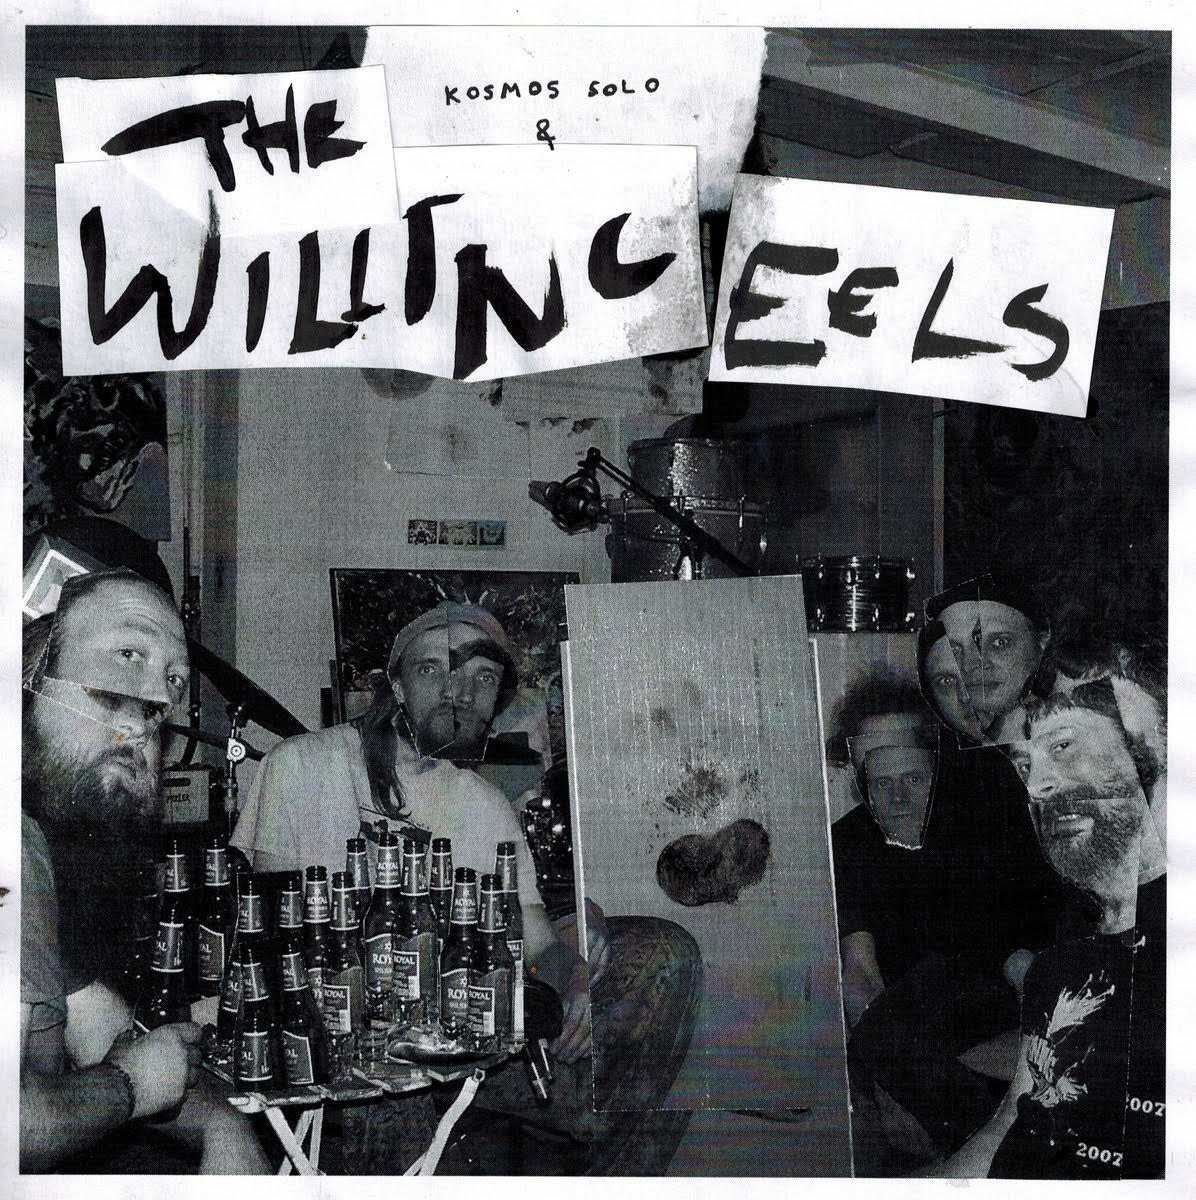 The House Festival – KOSMOS SOLO & The Willing Eels ((DK)) - Photo: 